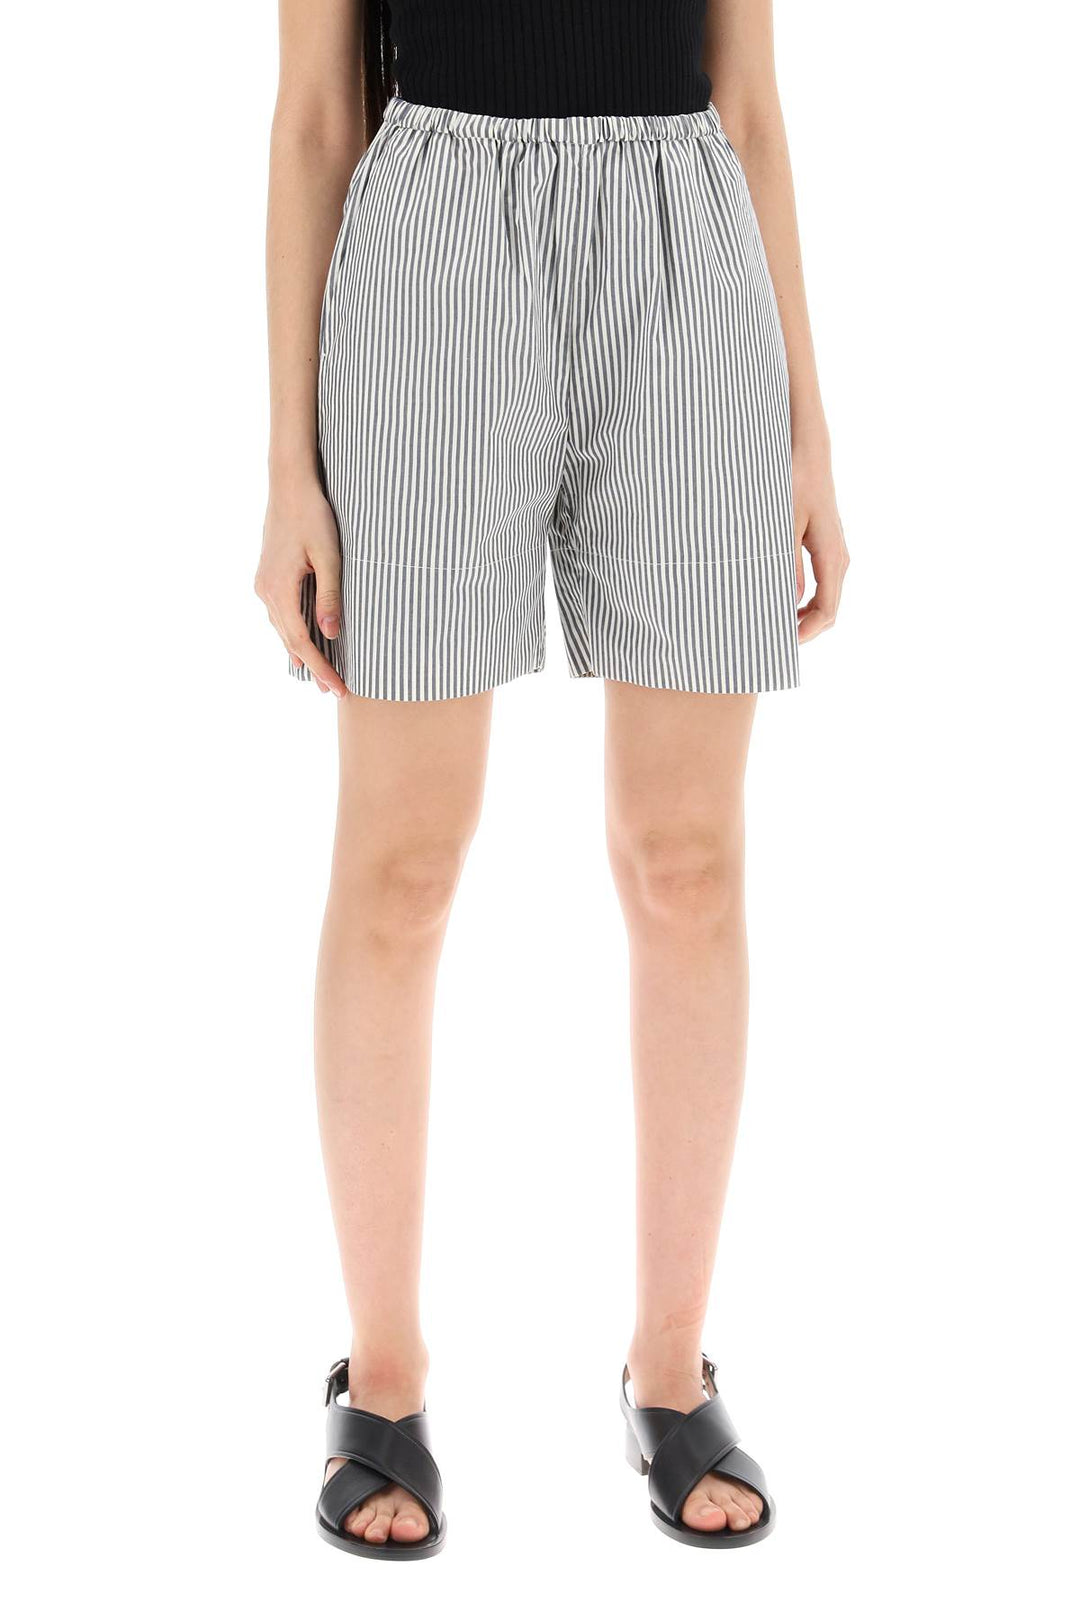 By Malene Birger Replace With Double Quotestriped Siona Organic Cotton Shortsreplace With Double Quote   Blue